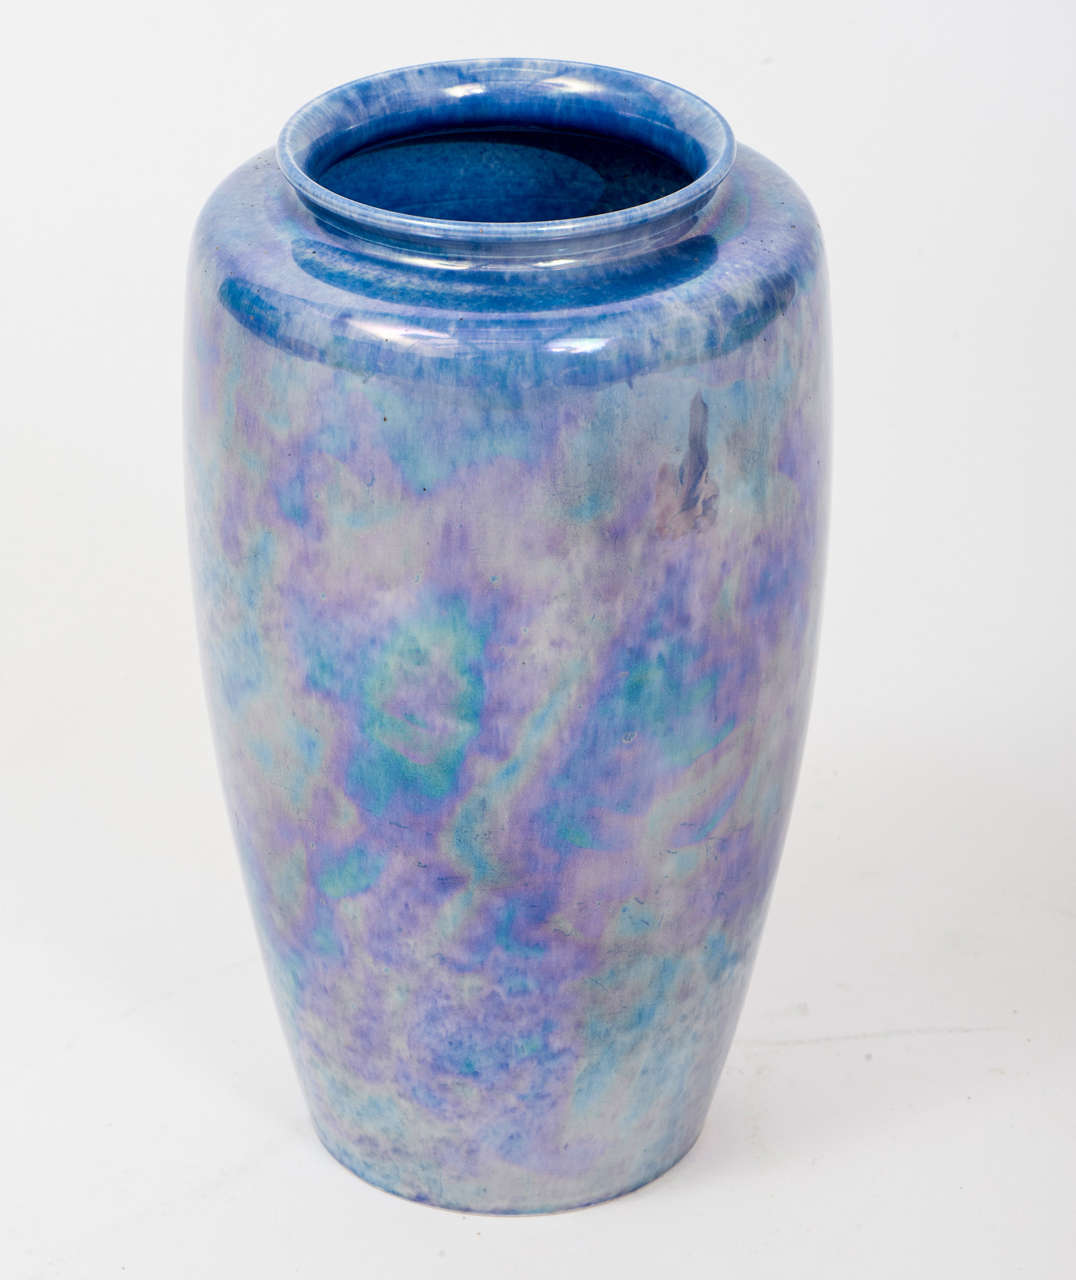 William Howson Taylor founded the Ruskin Art Pottery with his father in Smethwick, England in 1898 to be run in line with Arts & Crafts principles. Over the next 35 years he pioneered the development of a variety of innovative glazes, many of them